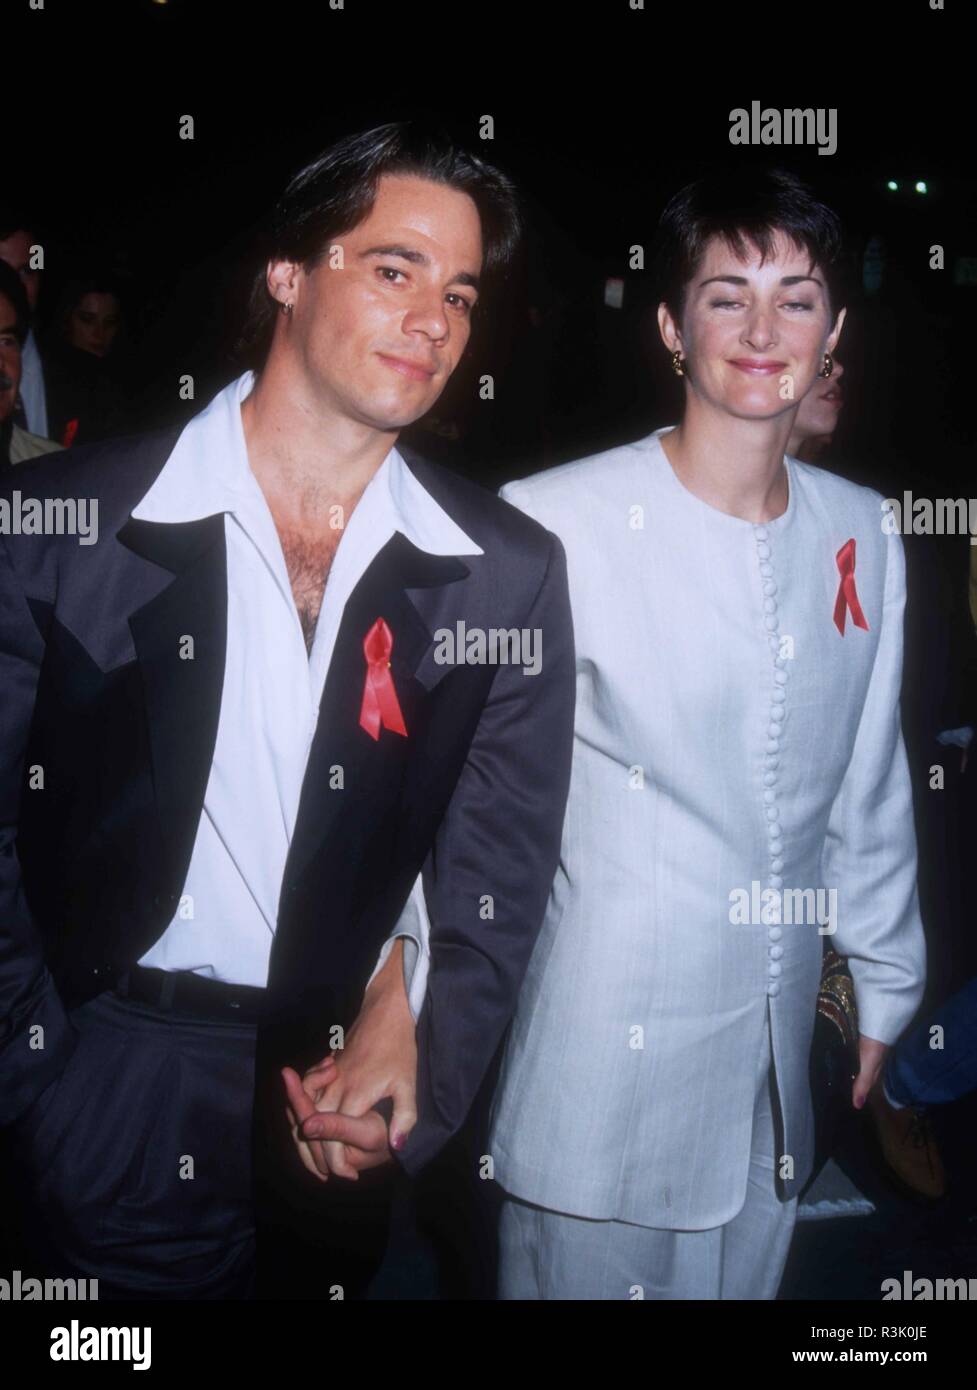 HOLLYWOOD, CA - FEBRUARY 10: (L-R) Actor Paul Mercurio and wife Andrea Mercurio attend 'Strictly Ballroom' Premiere on February 10, 1993 at the Galaxy Theatre in Hollywood, California. Photo by Barry King/Alamy Stock Photo Stock Photo